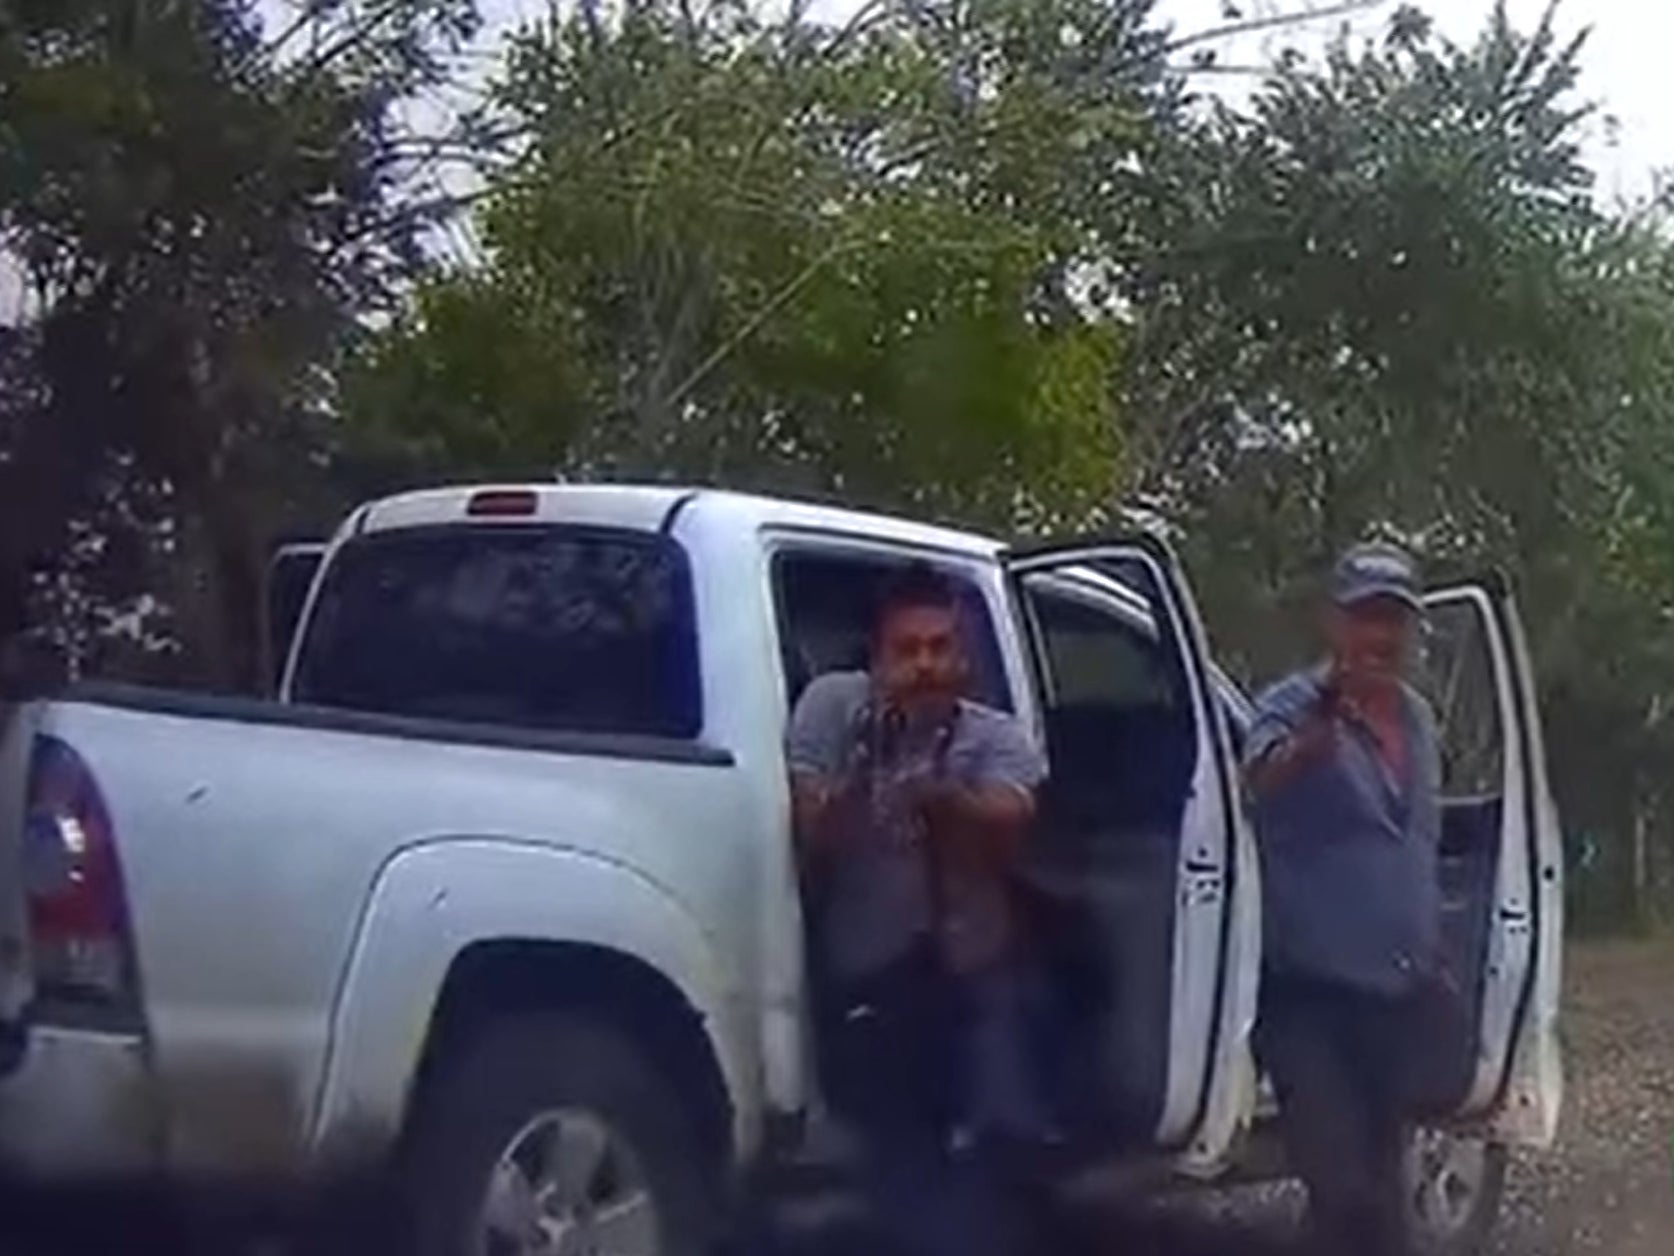 Viral video filmed in early 2020 showed two American tourists allegedly being confronted by cartel members in Tabasco, Mexico